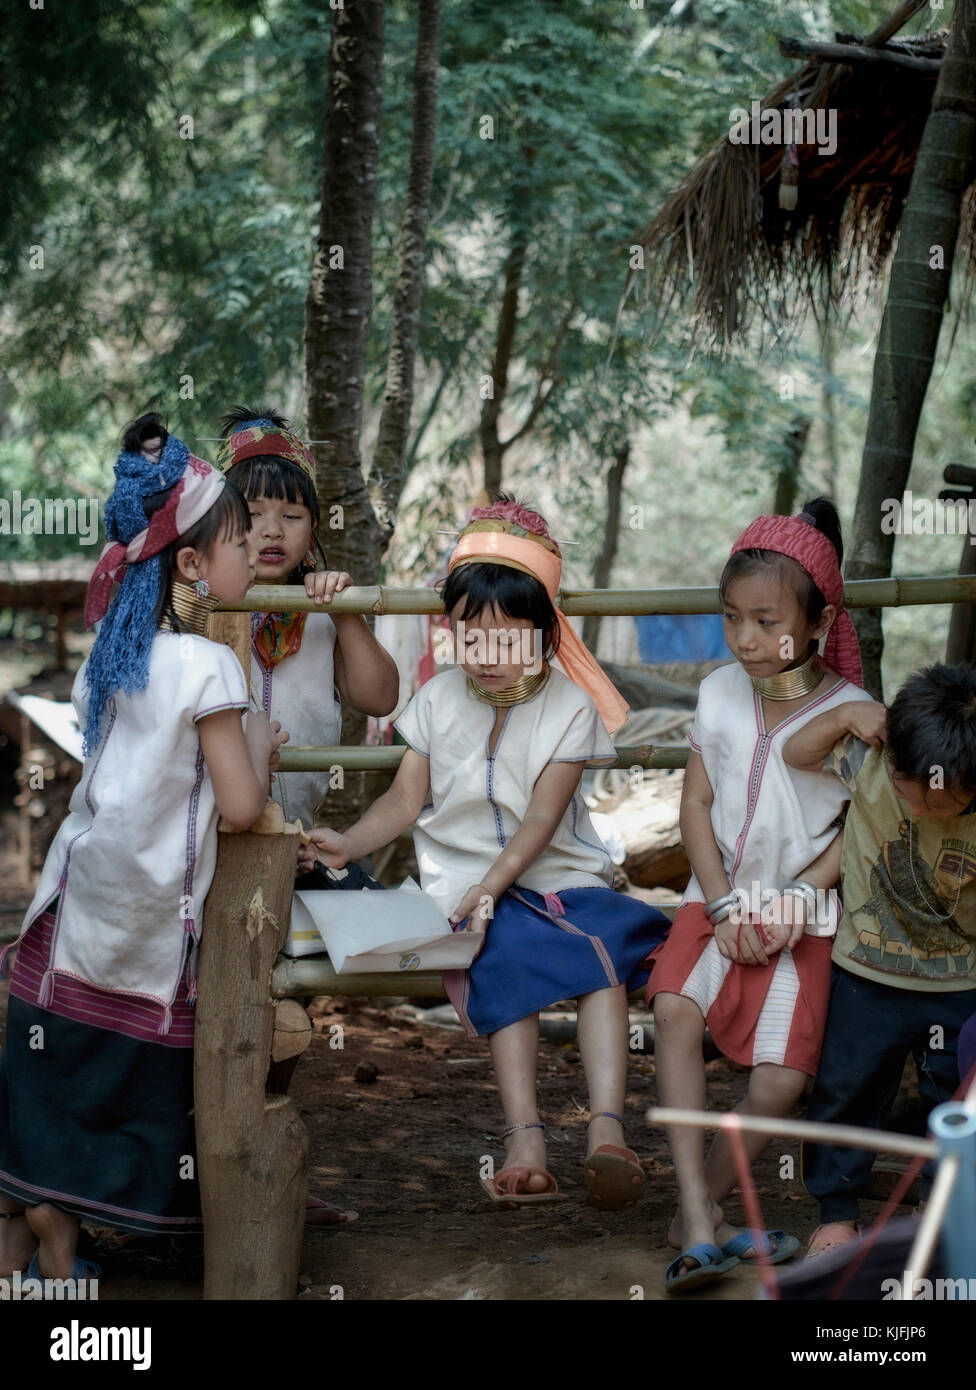 Hill tribe children Long neck (Kayan)  of Northern Thailand. Rural Thailand people S.E. Asia. Hill tribes Stock Photo